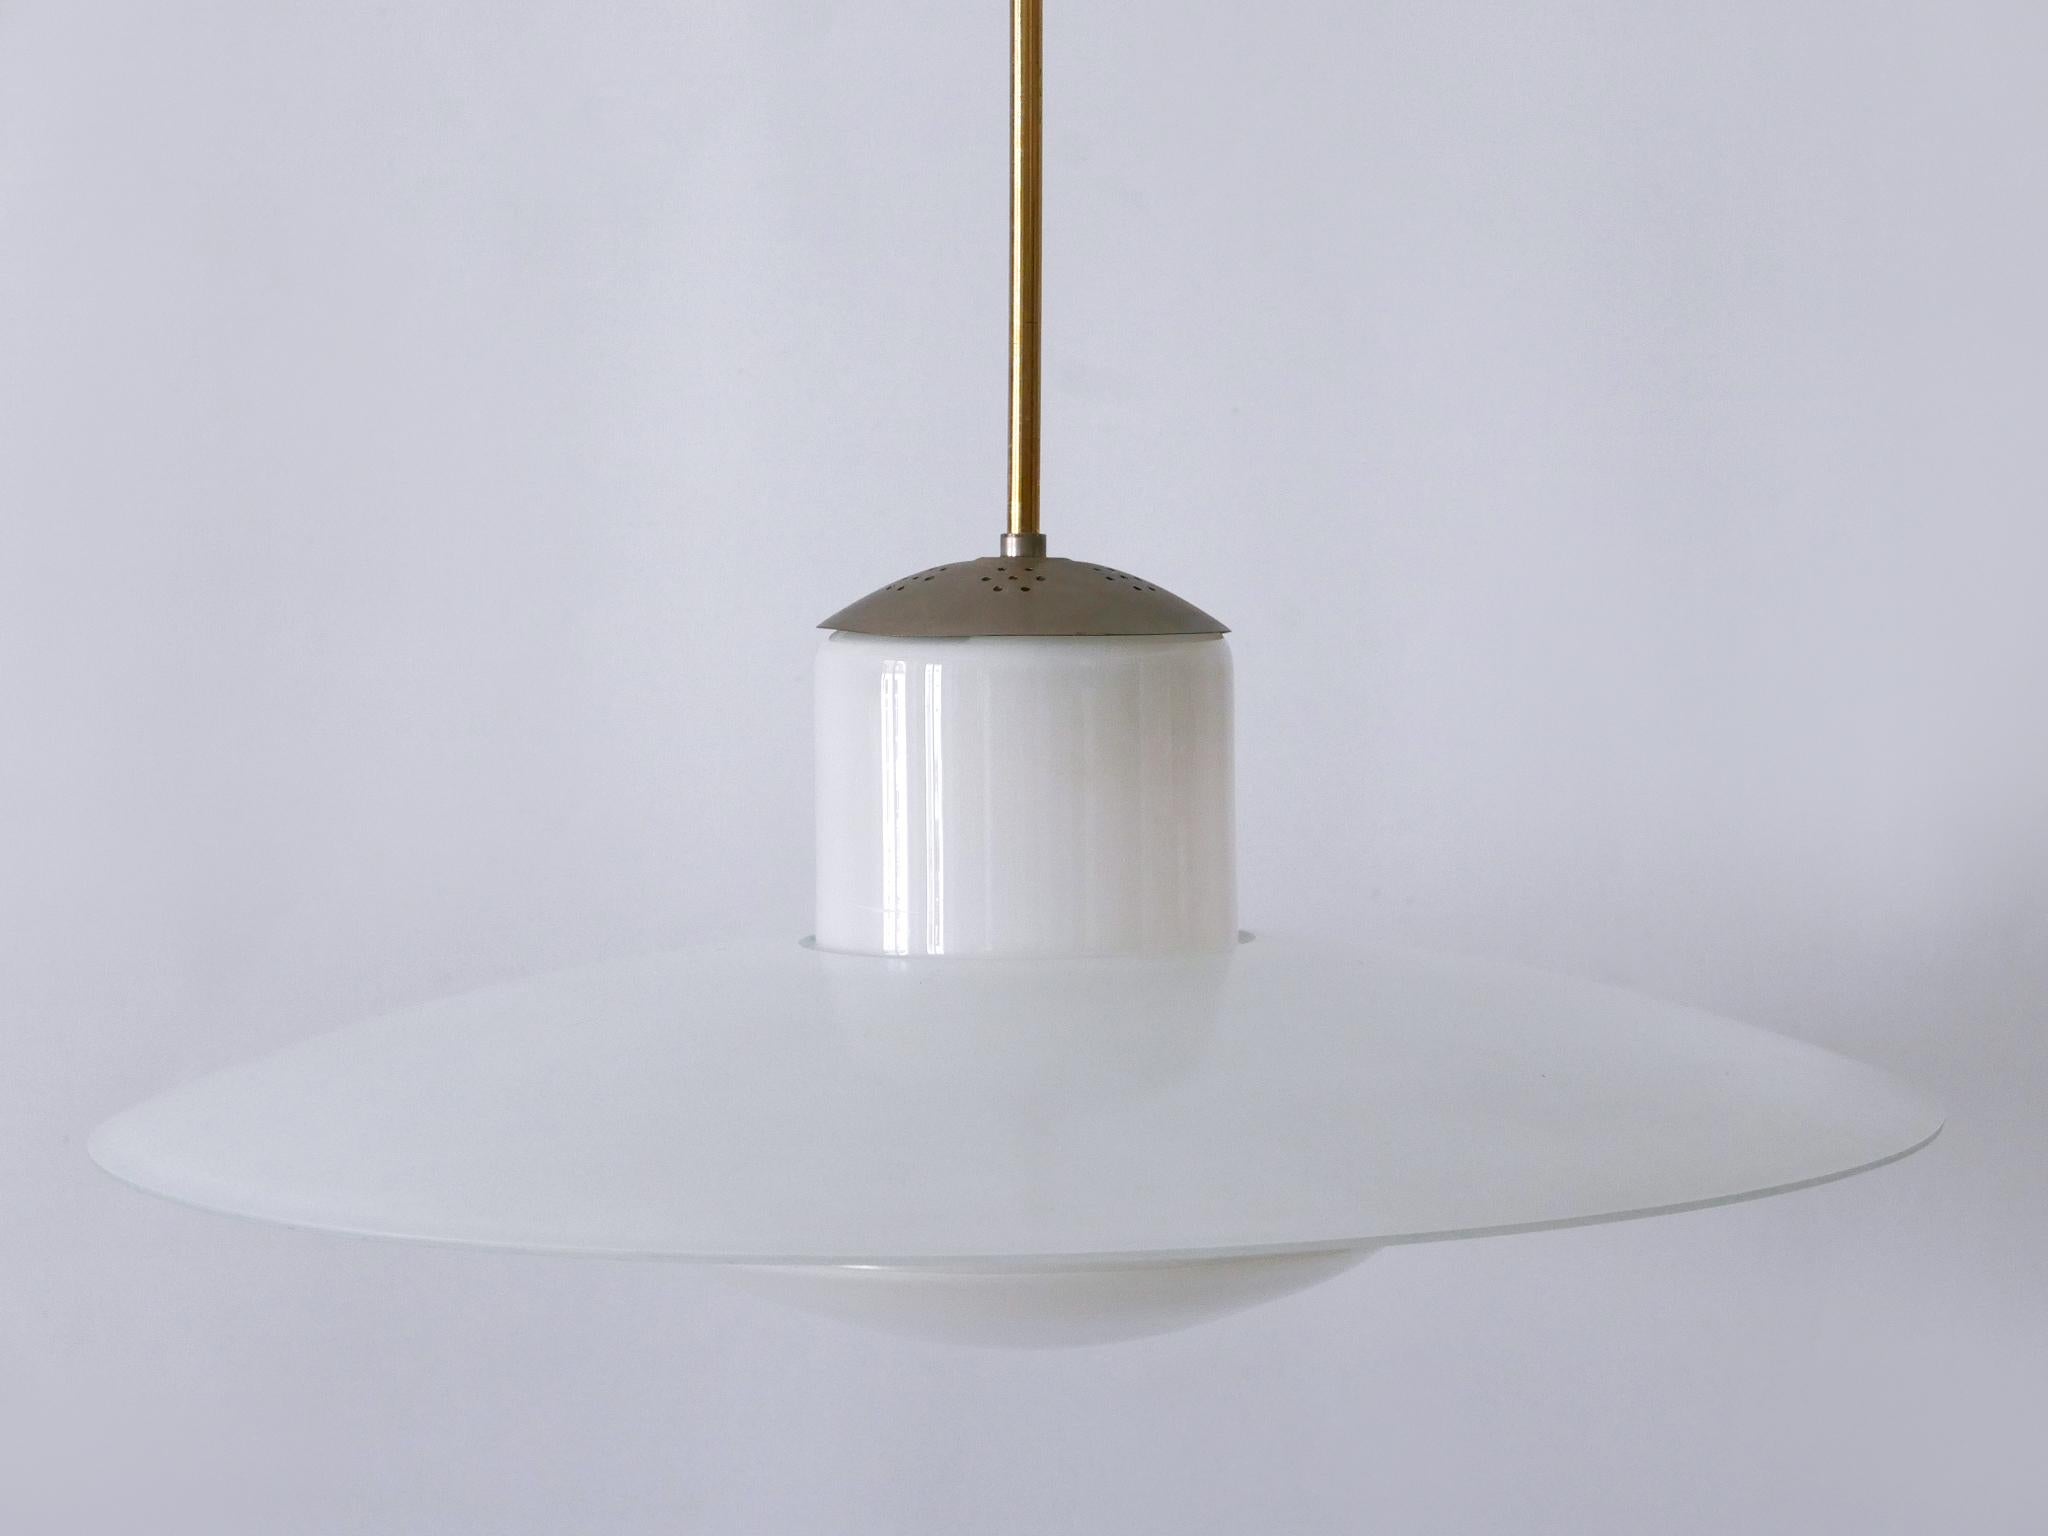 Rare Mid-Century Modern Pendant Lamp by Wolfgang Tümpel for Doria Germany 1950s For Sale 11